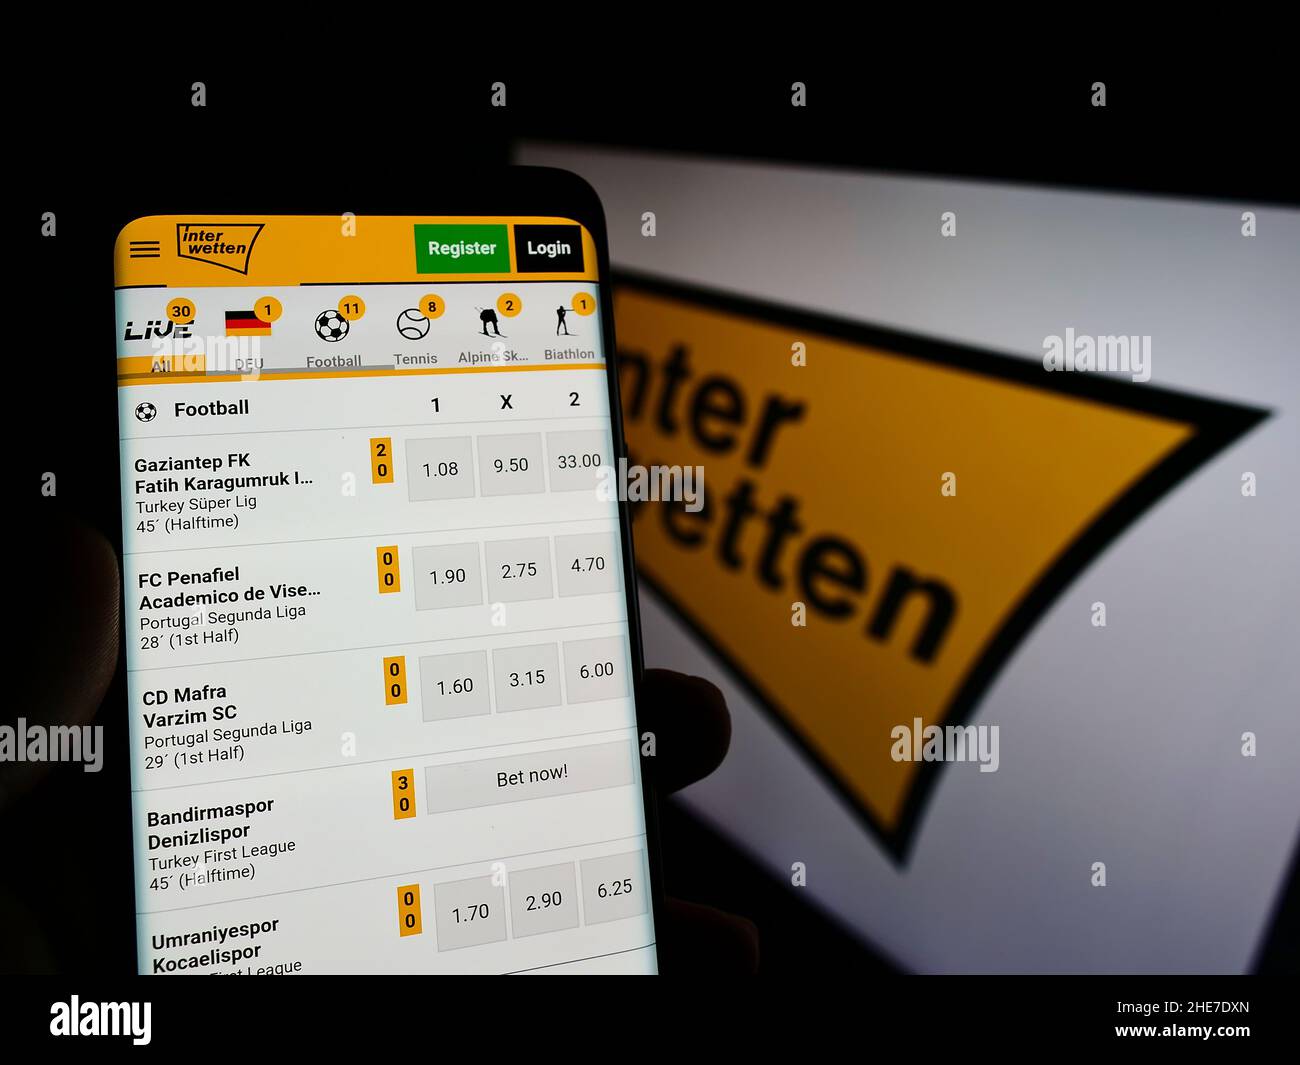 Person holding cellphone with website of sports betting company Interwetten Ltd. on screen in front of logo. Focus on center of phone display. Stock Photo